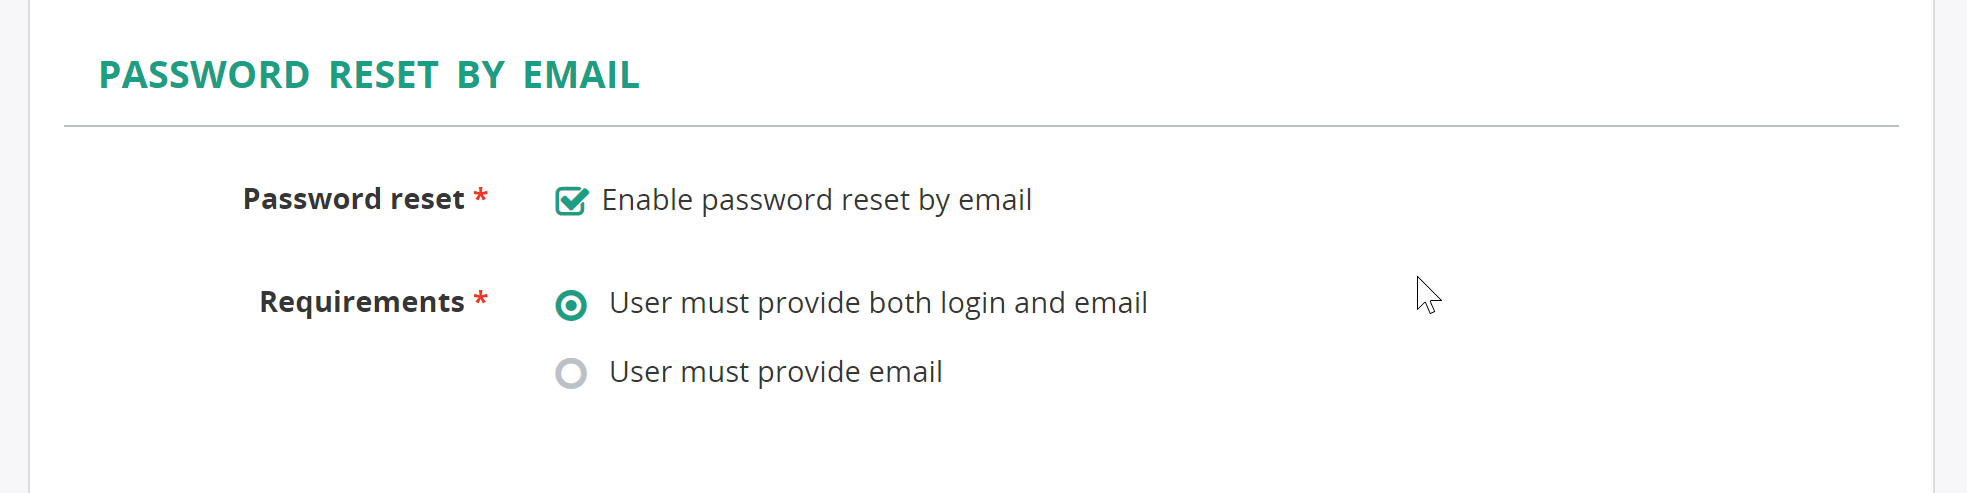 Password Policy